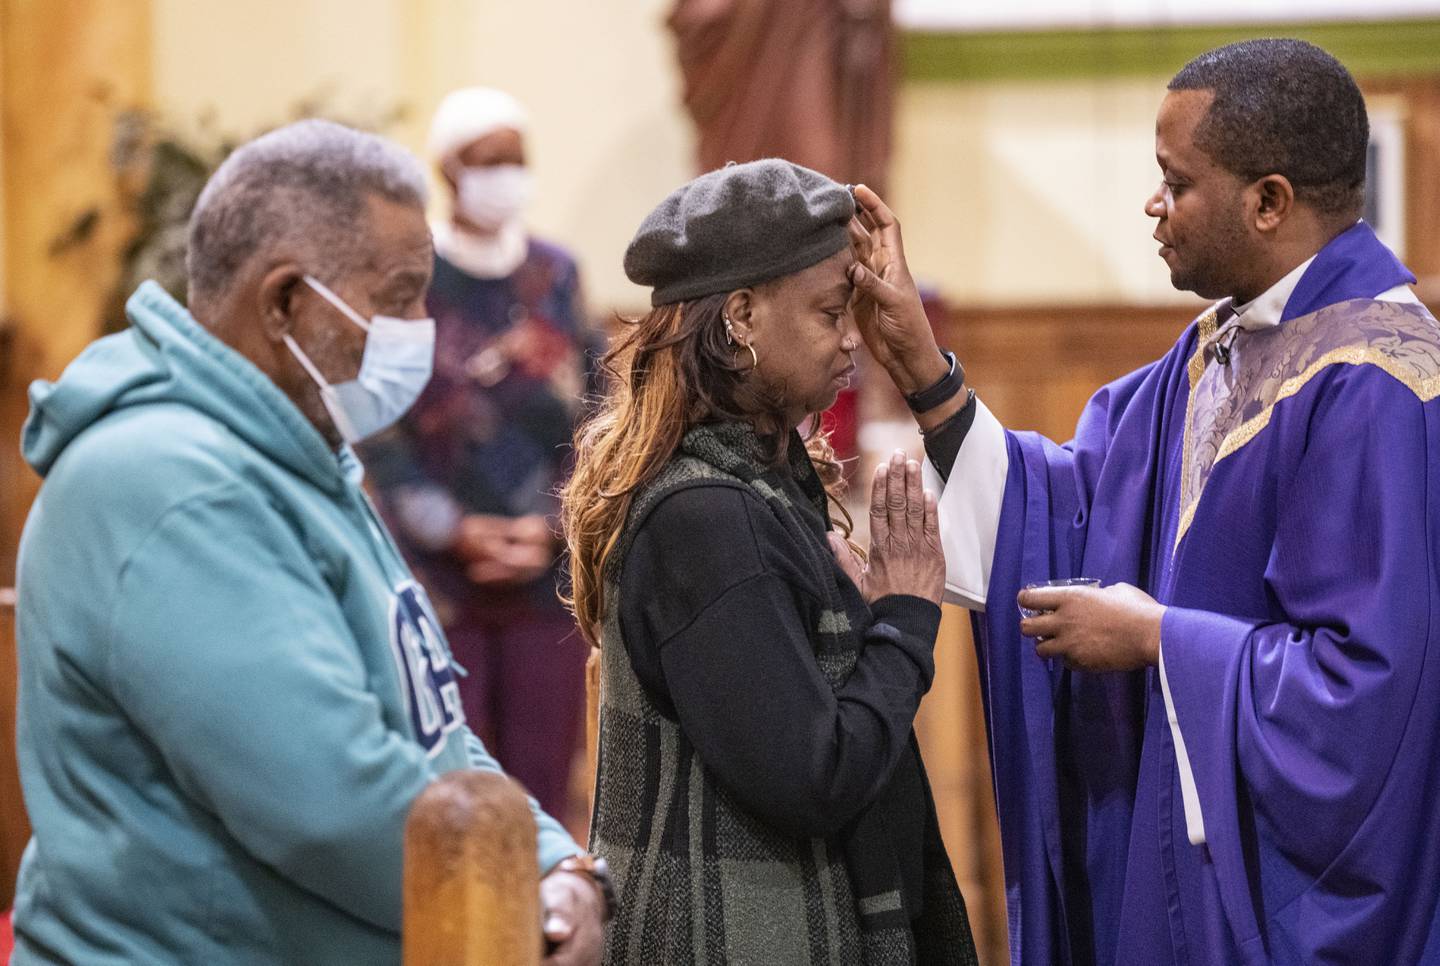 Catholic faithfuls participate receive the cross on their foreheads in ash from Fr. Xavier Edet, SSJ, in the celebration of Ash Wednesday at St. Francis Xavier Church, in Baltimore, Wednesday, February 22, 2023.